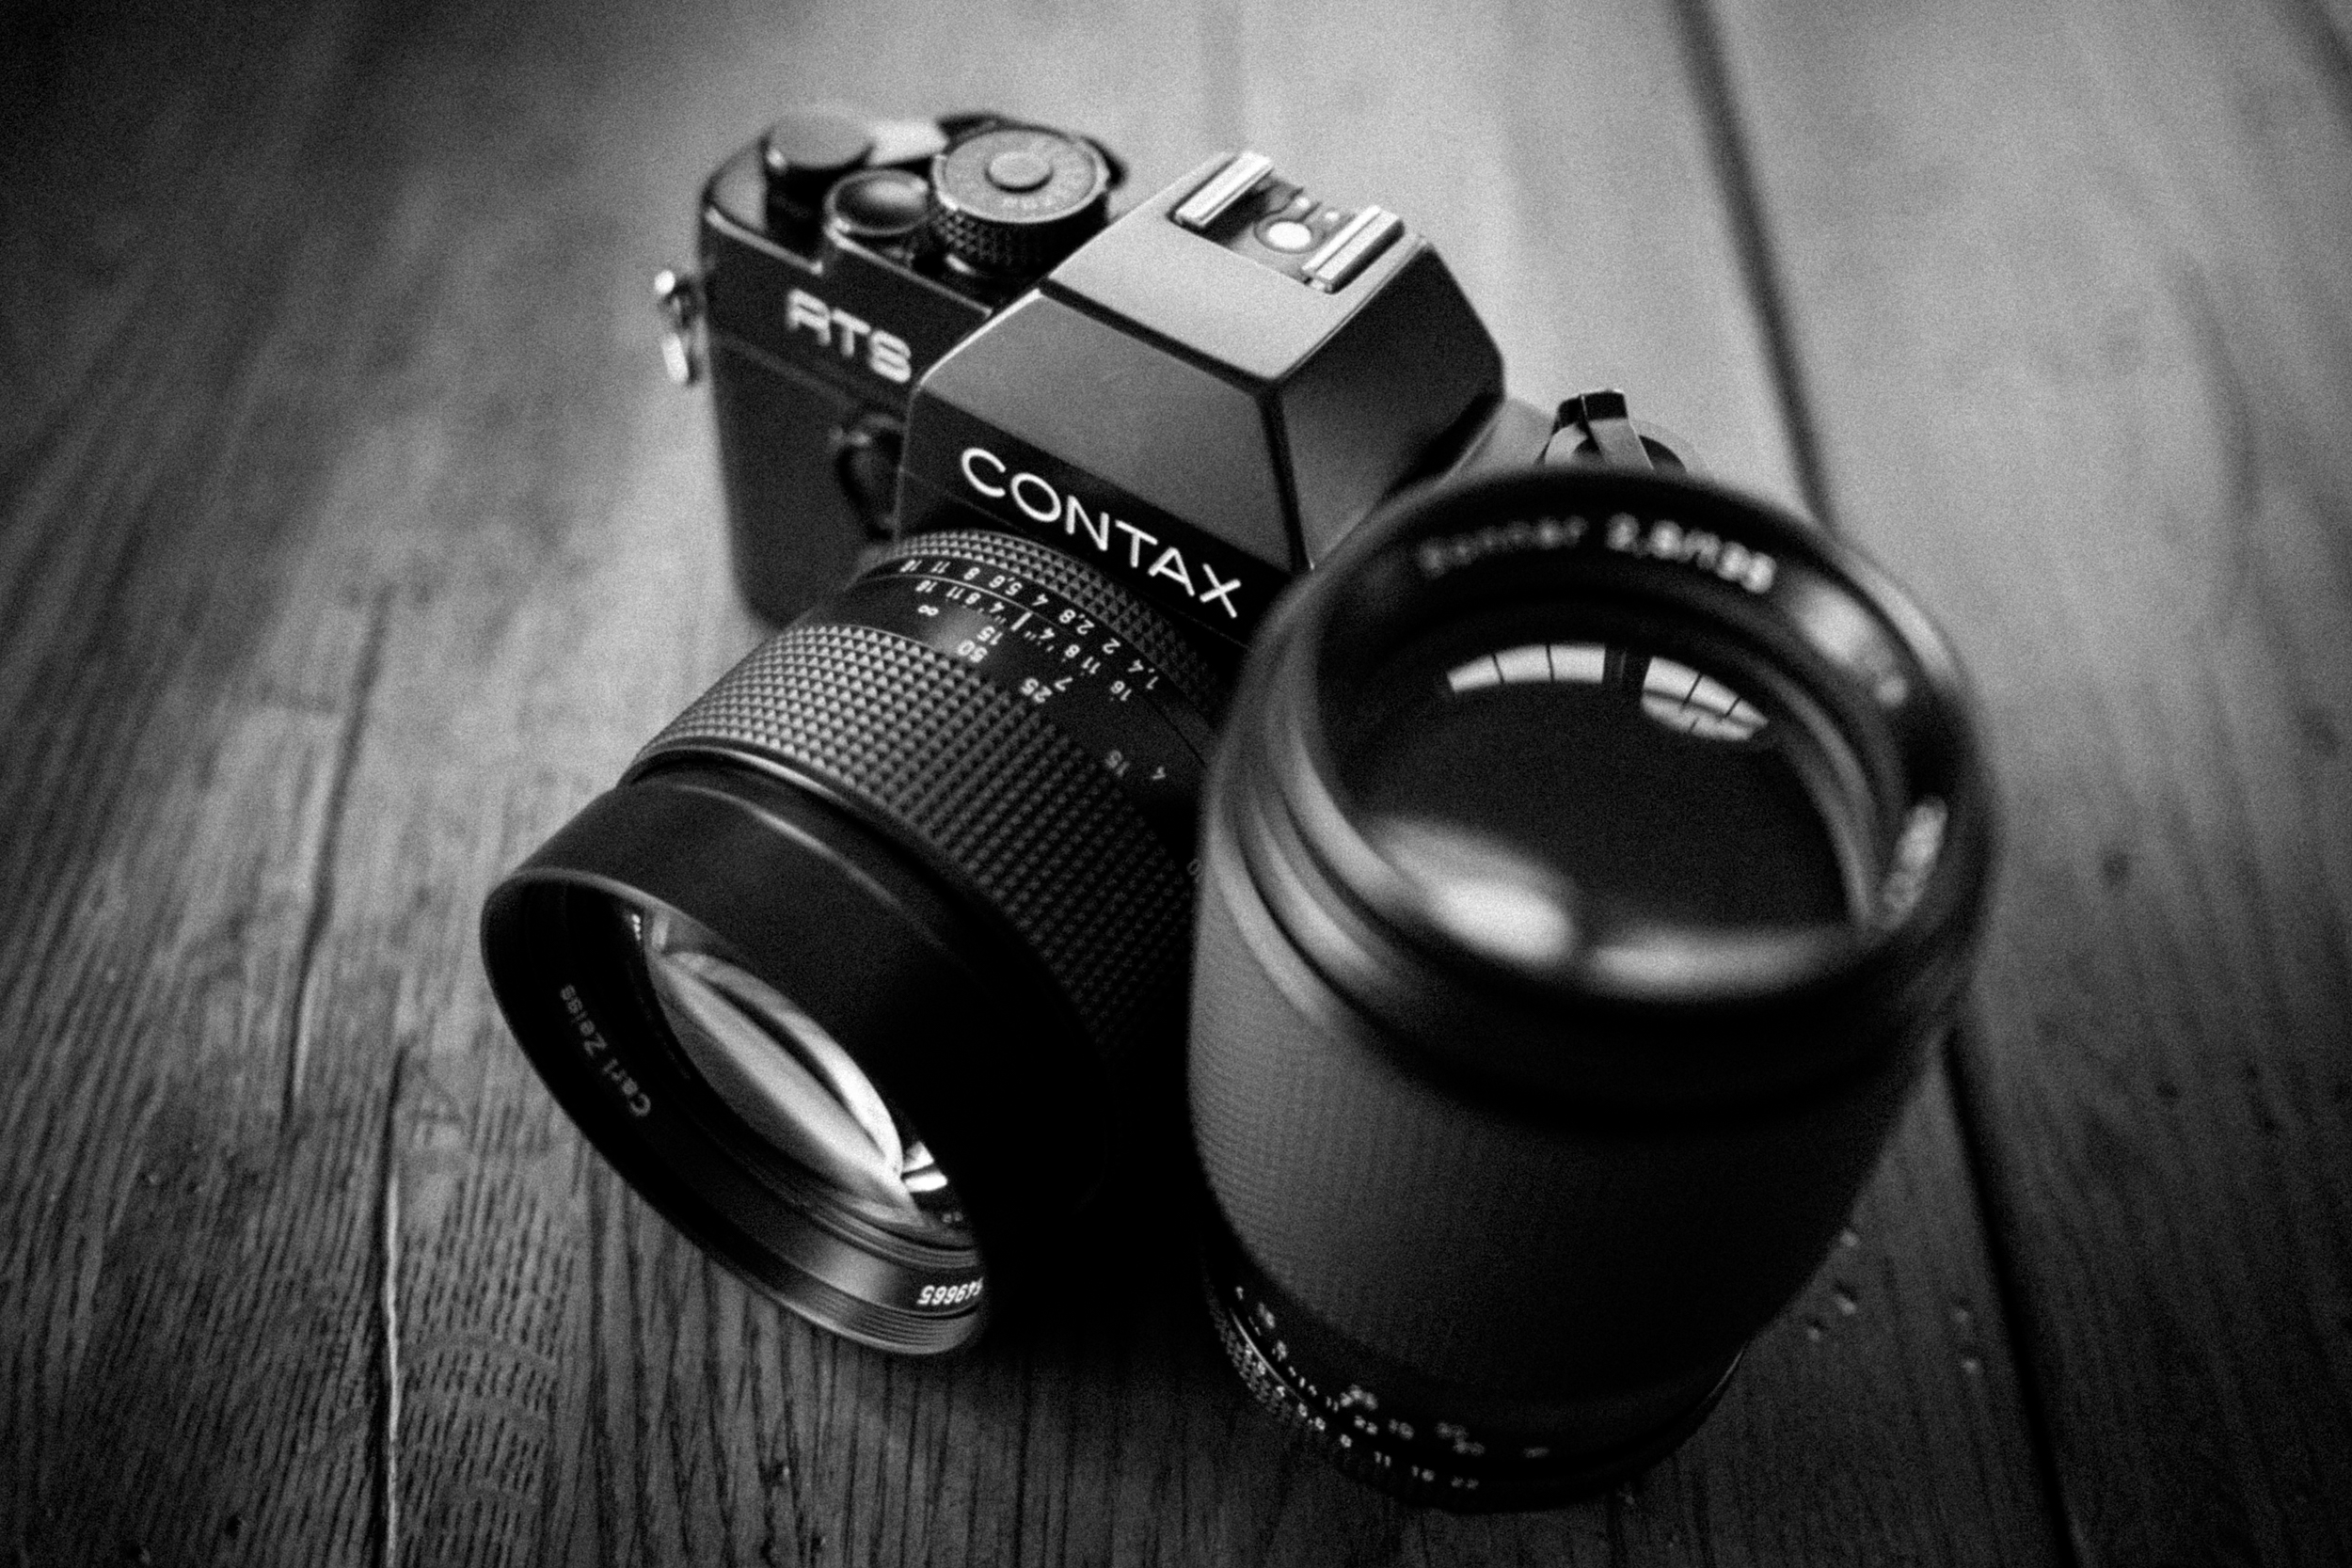 The Contax Yashica Zeiss 85mm 1.4 Planar — JOE D'AGOSTINO